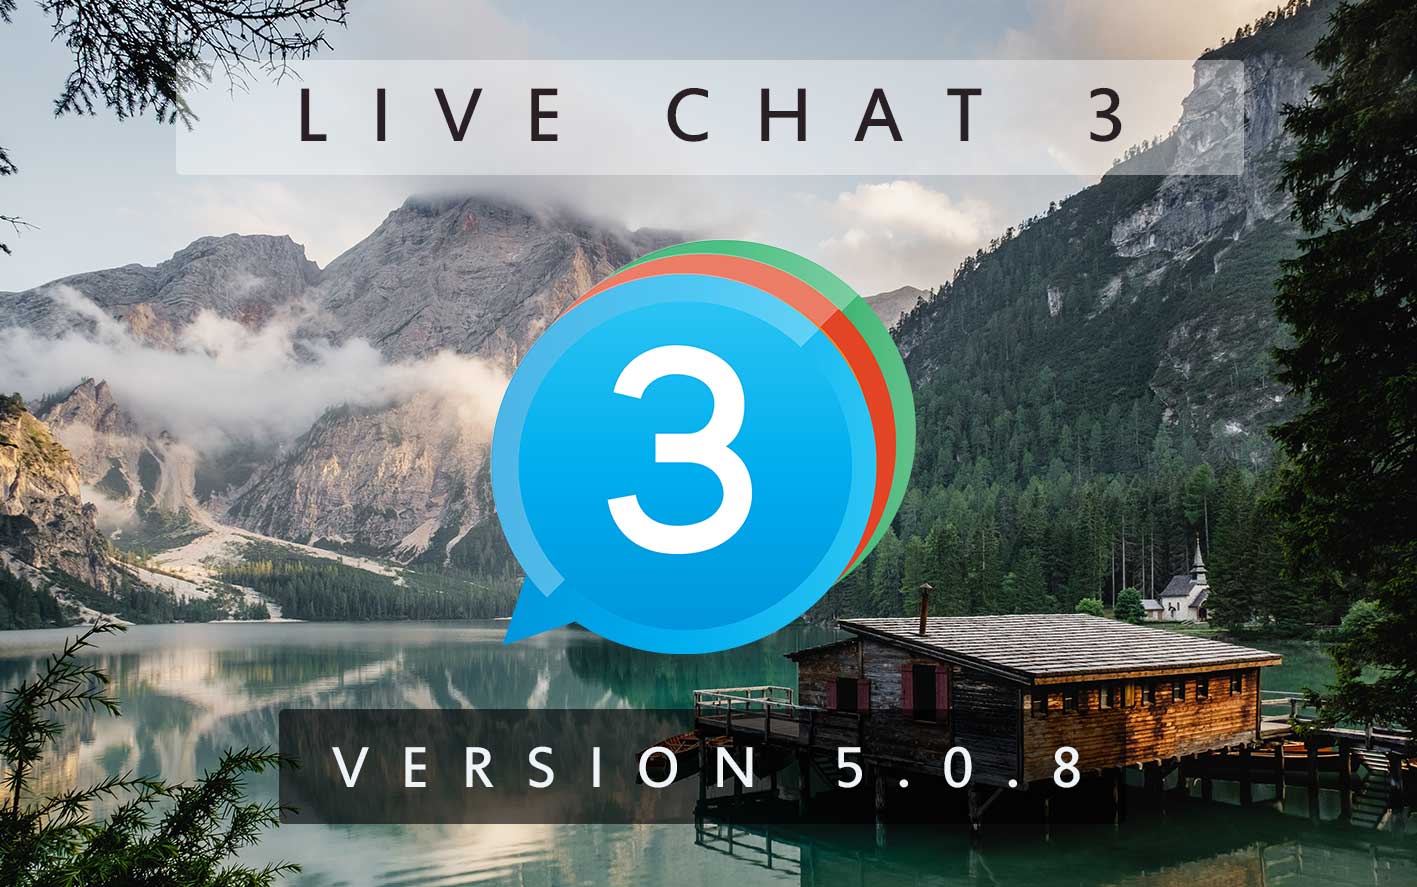 Live Chat 3 - Version 5.0.8